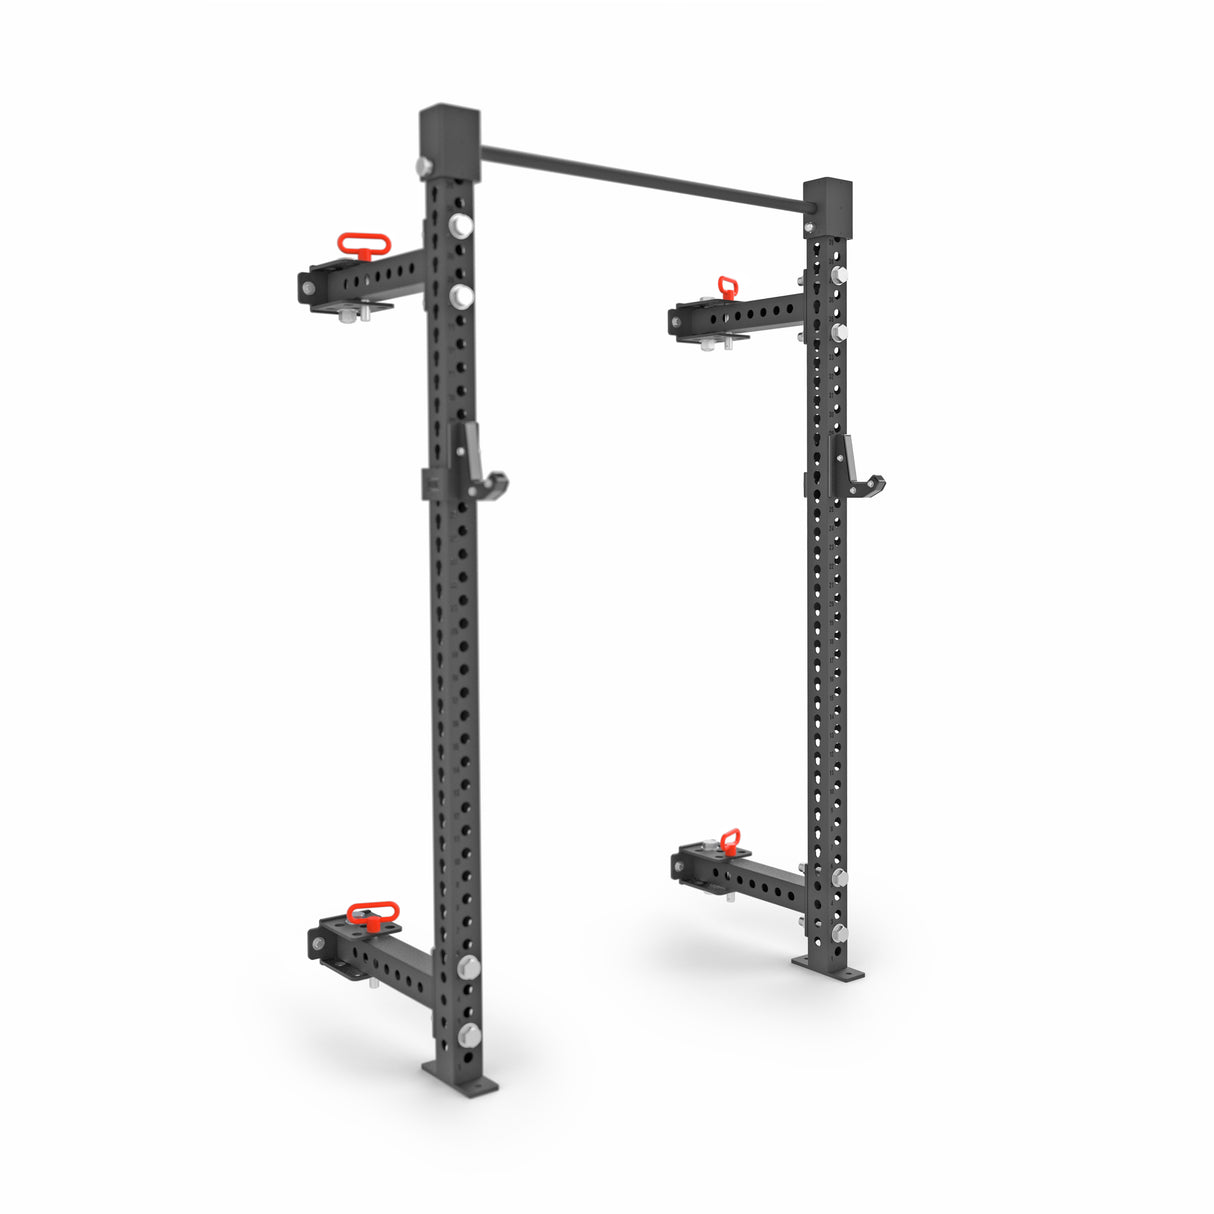 	Product picture of the Manticore Folding Power Half Rack PREBUILT